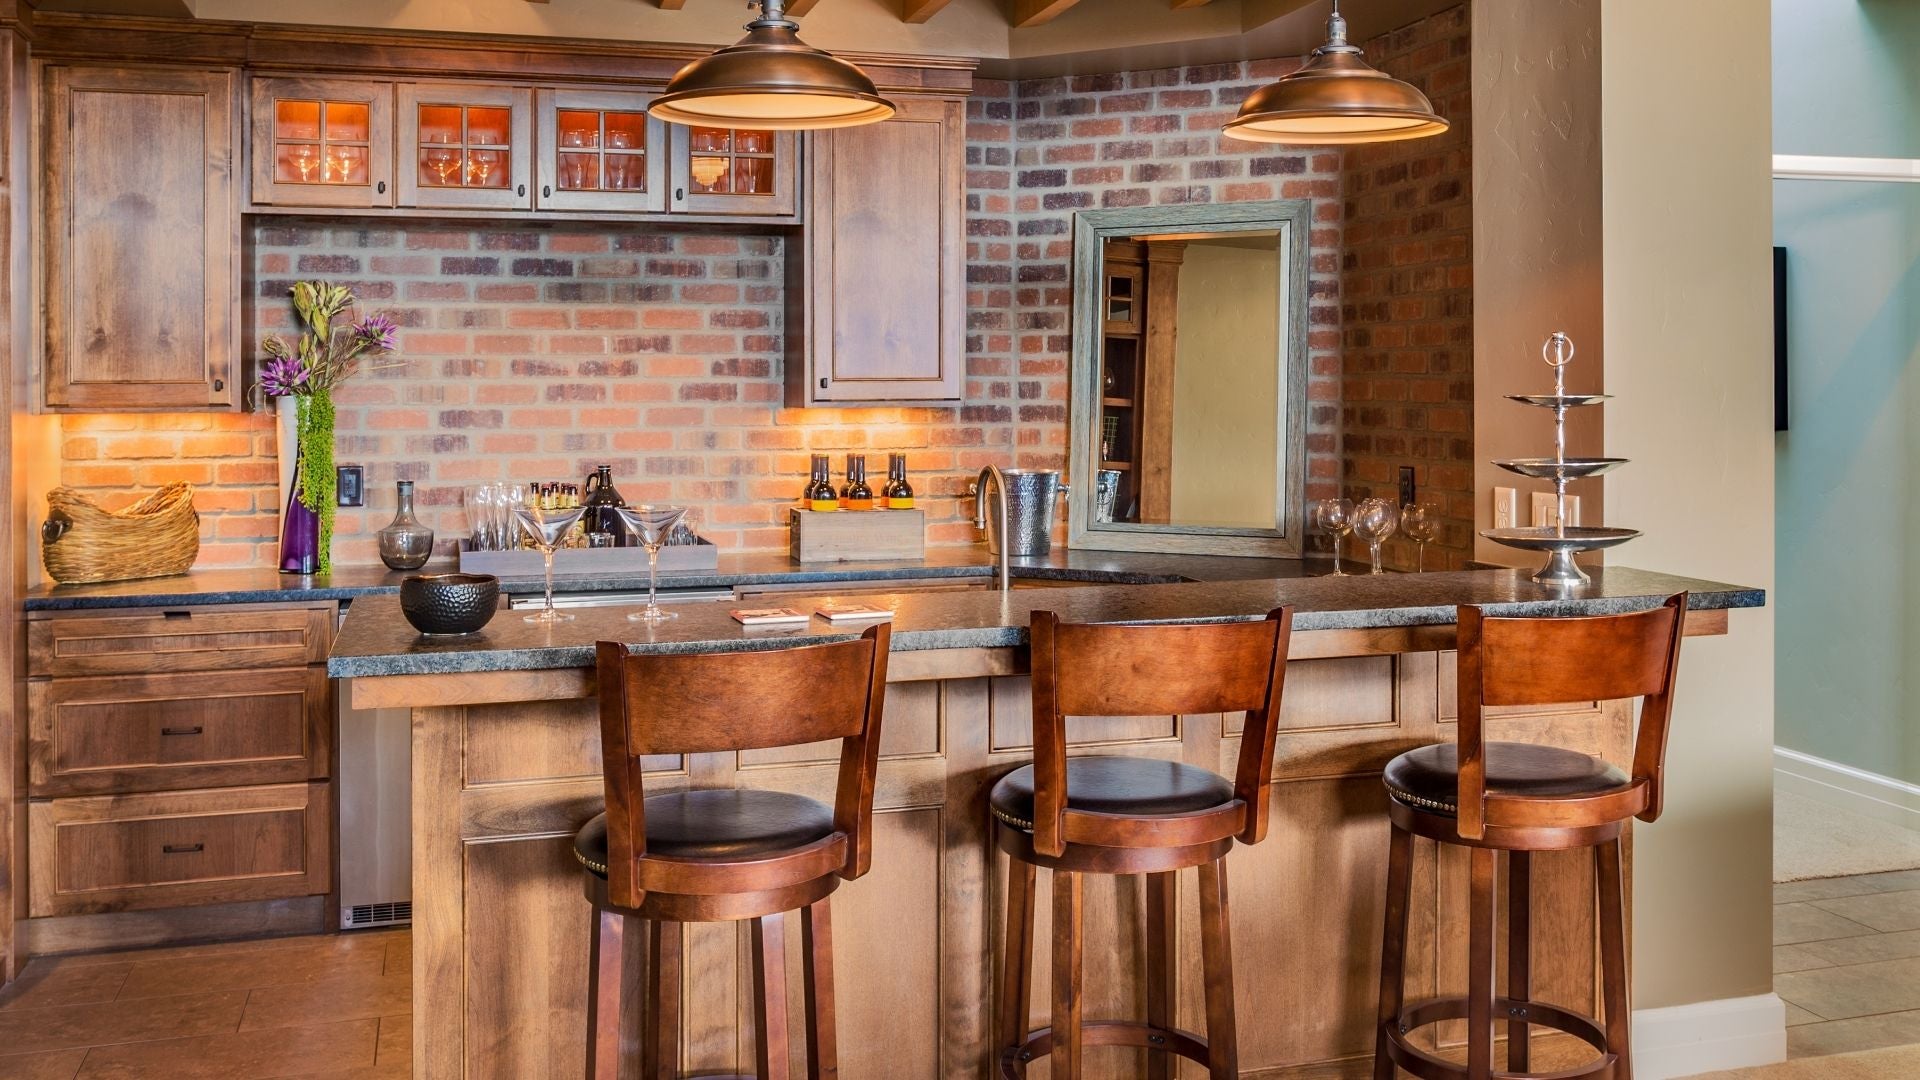 How to Build a DIY Home Bar: Step-by-Step Guide